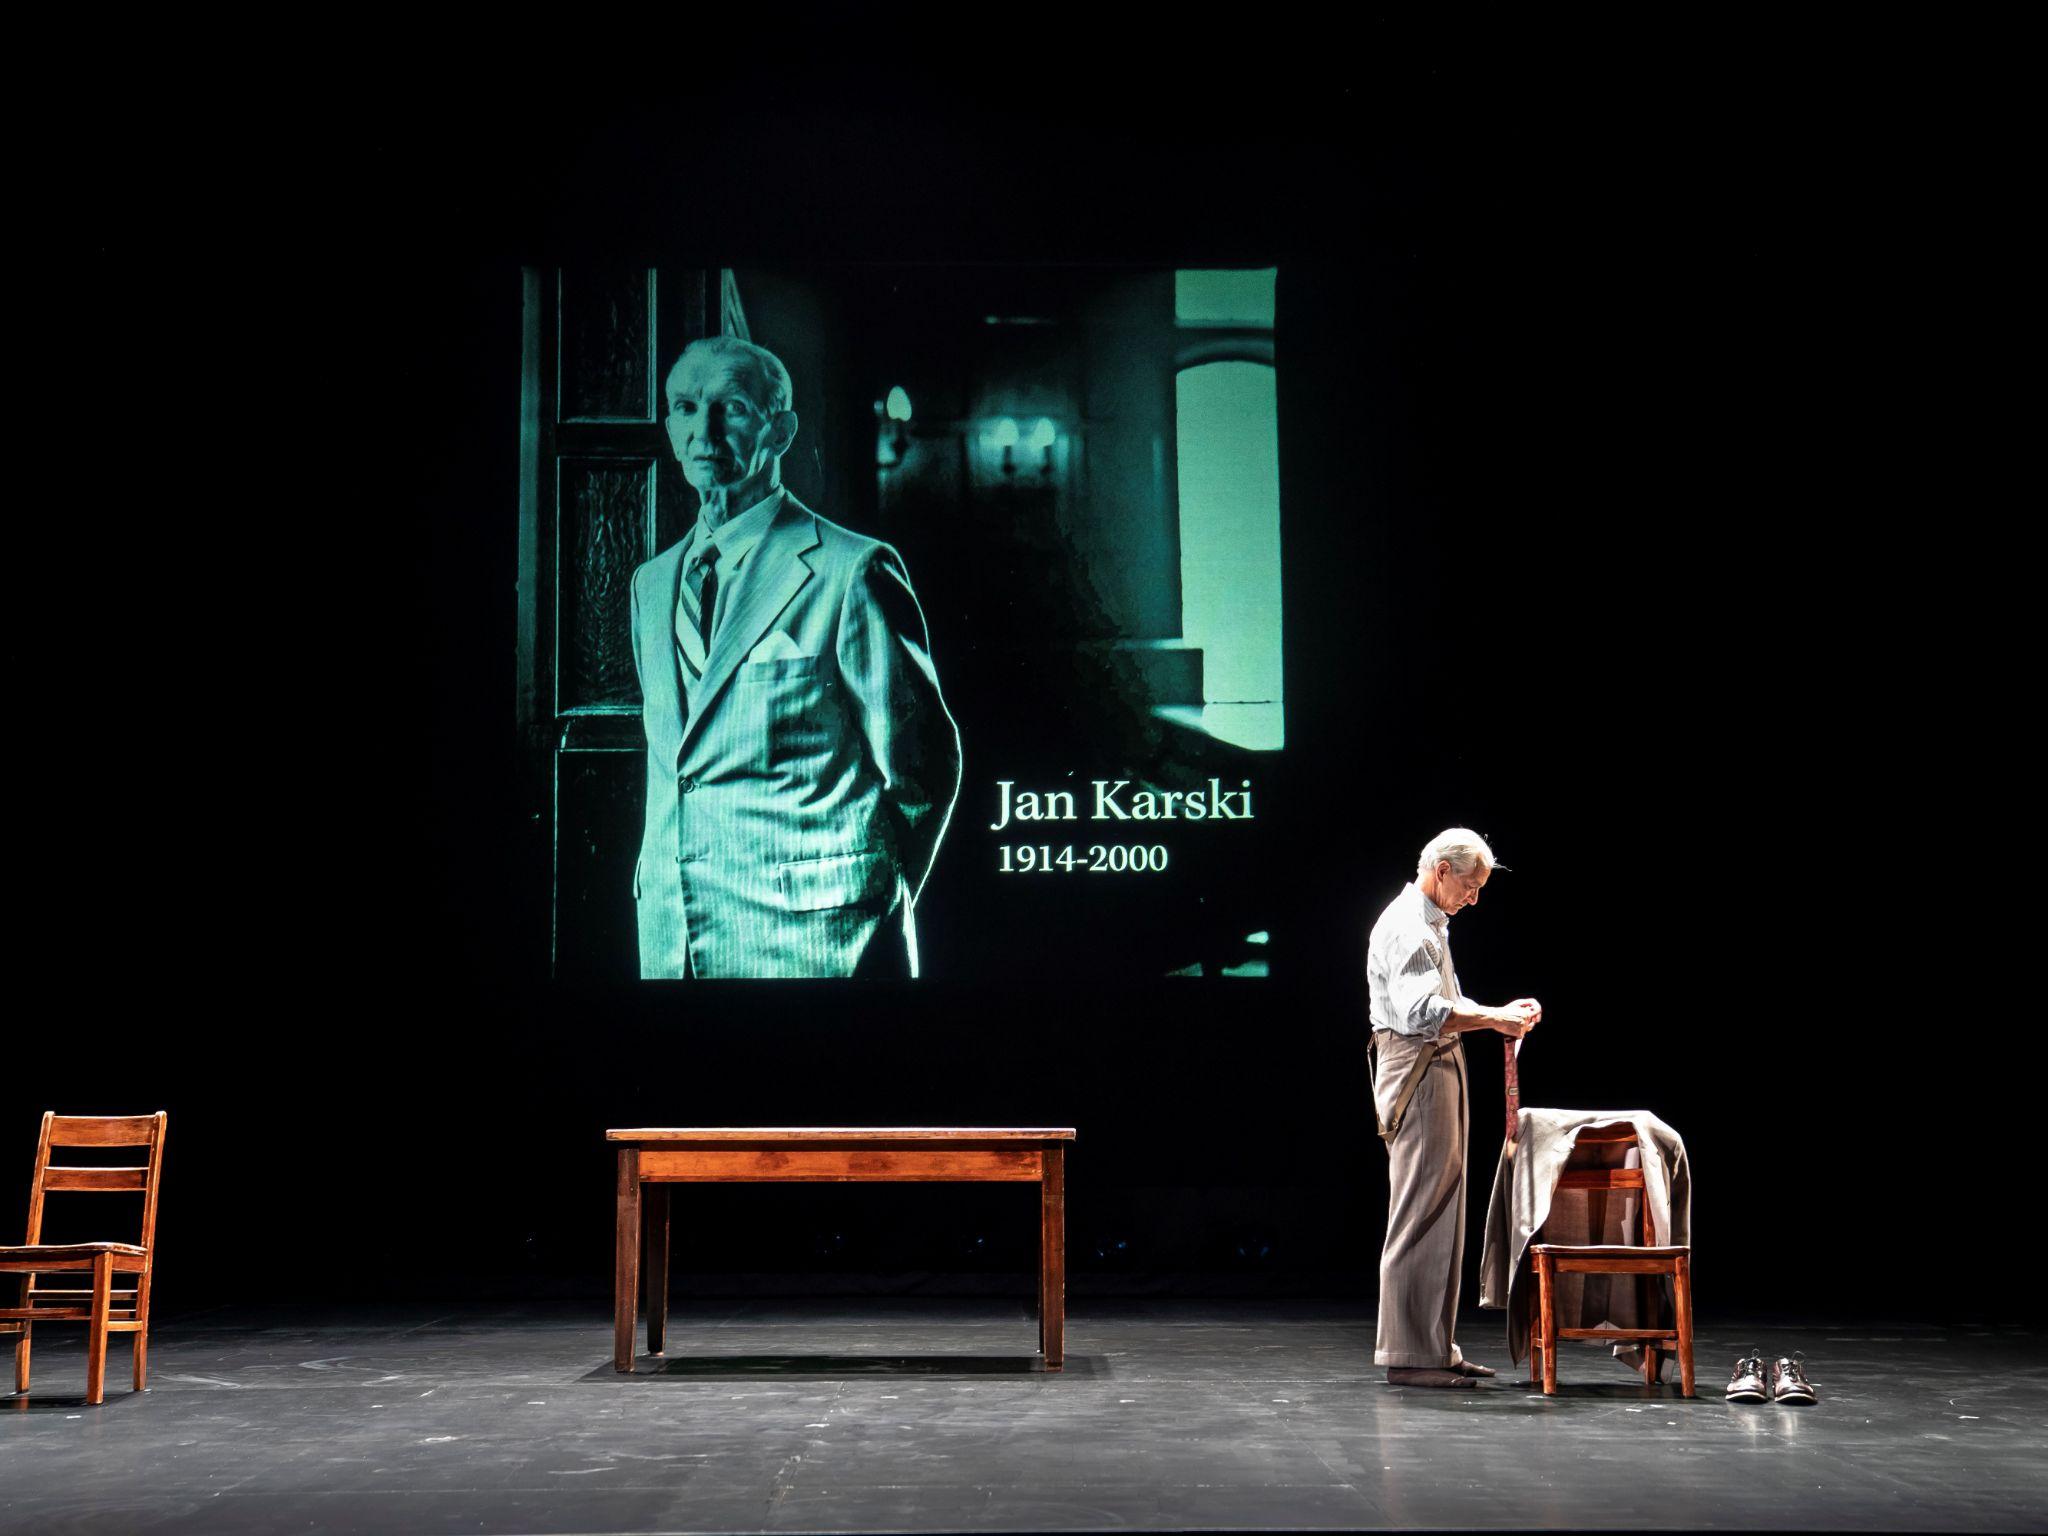 David Strathairn in “Remember This: The Lesson of Jan Karski '' at Theatre for a New Audience. Photographed by Hollis King.